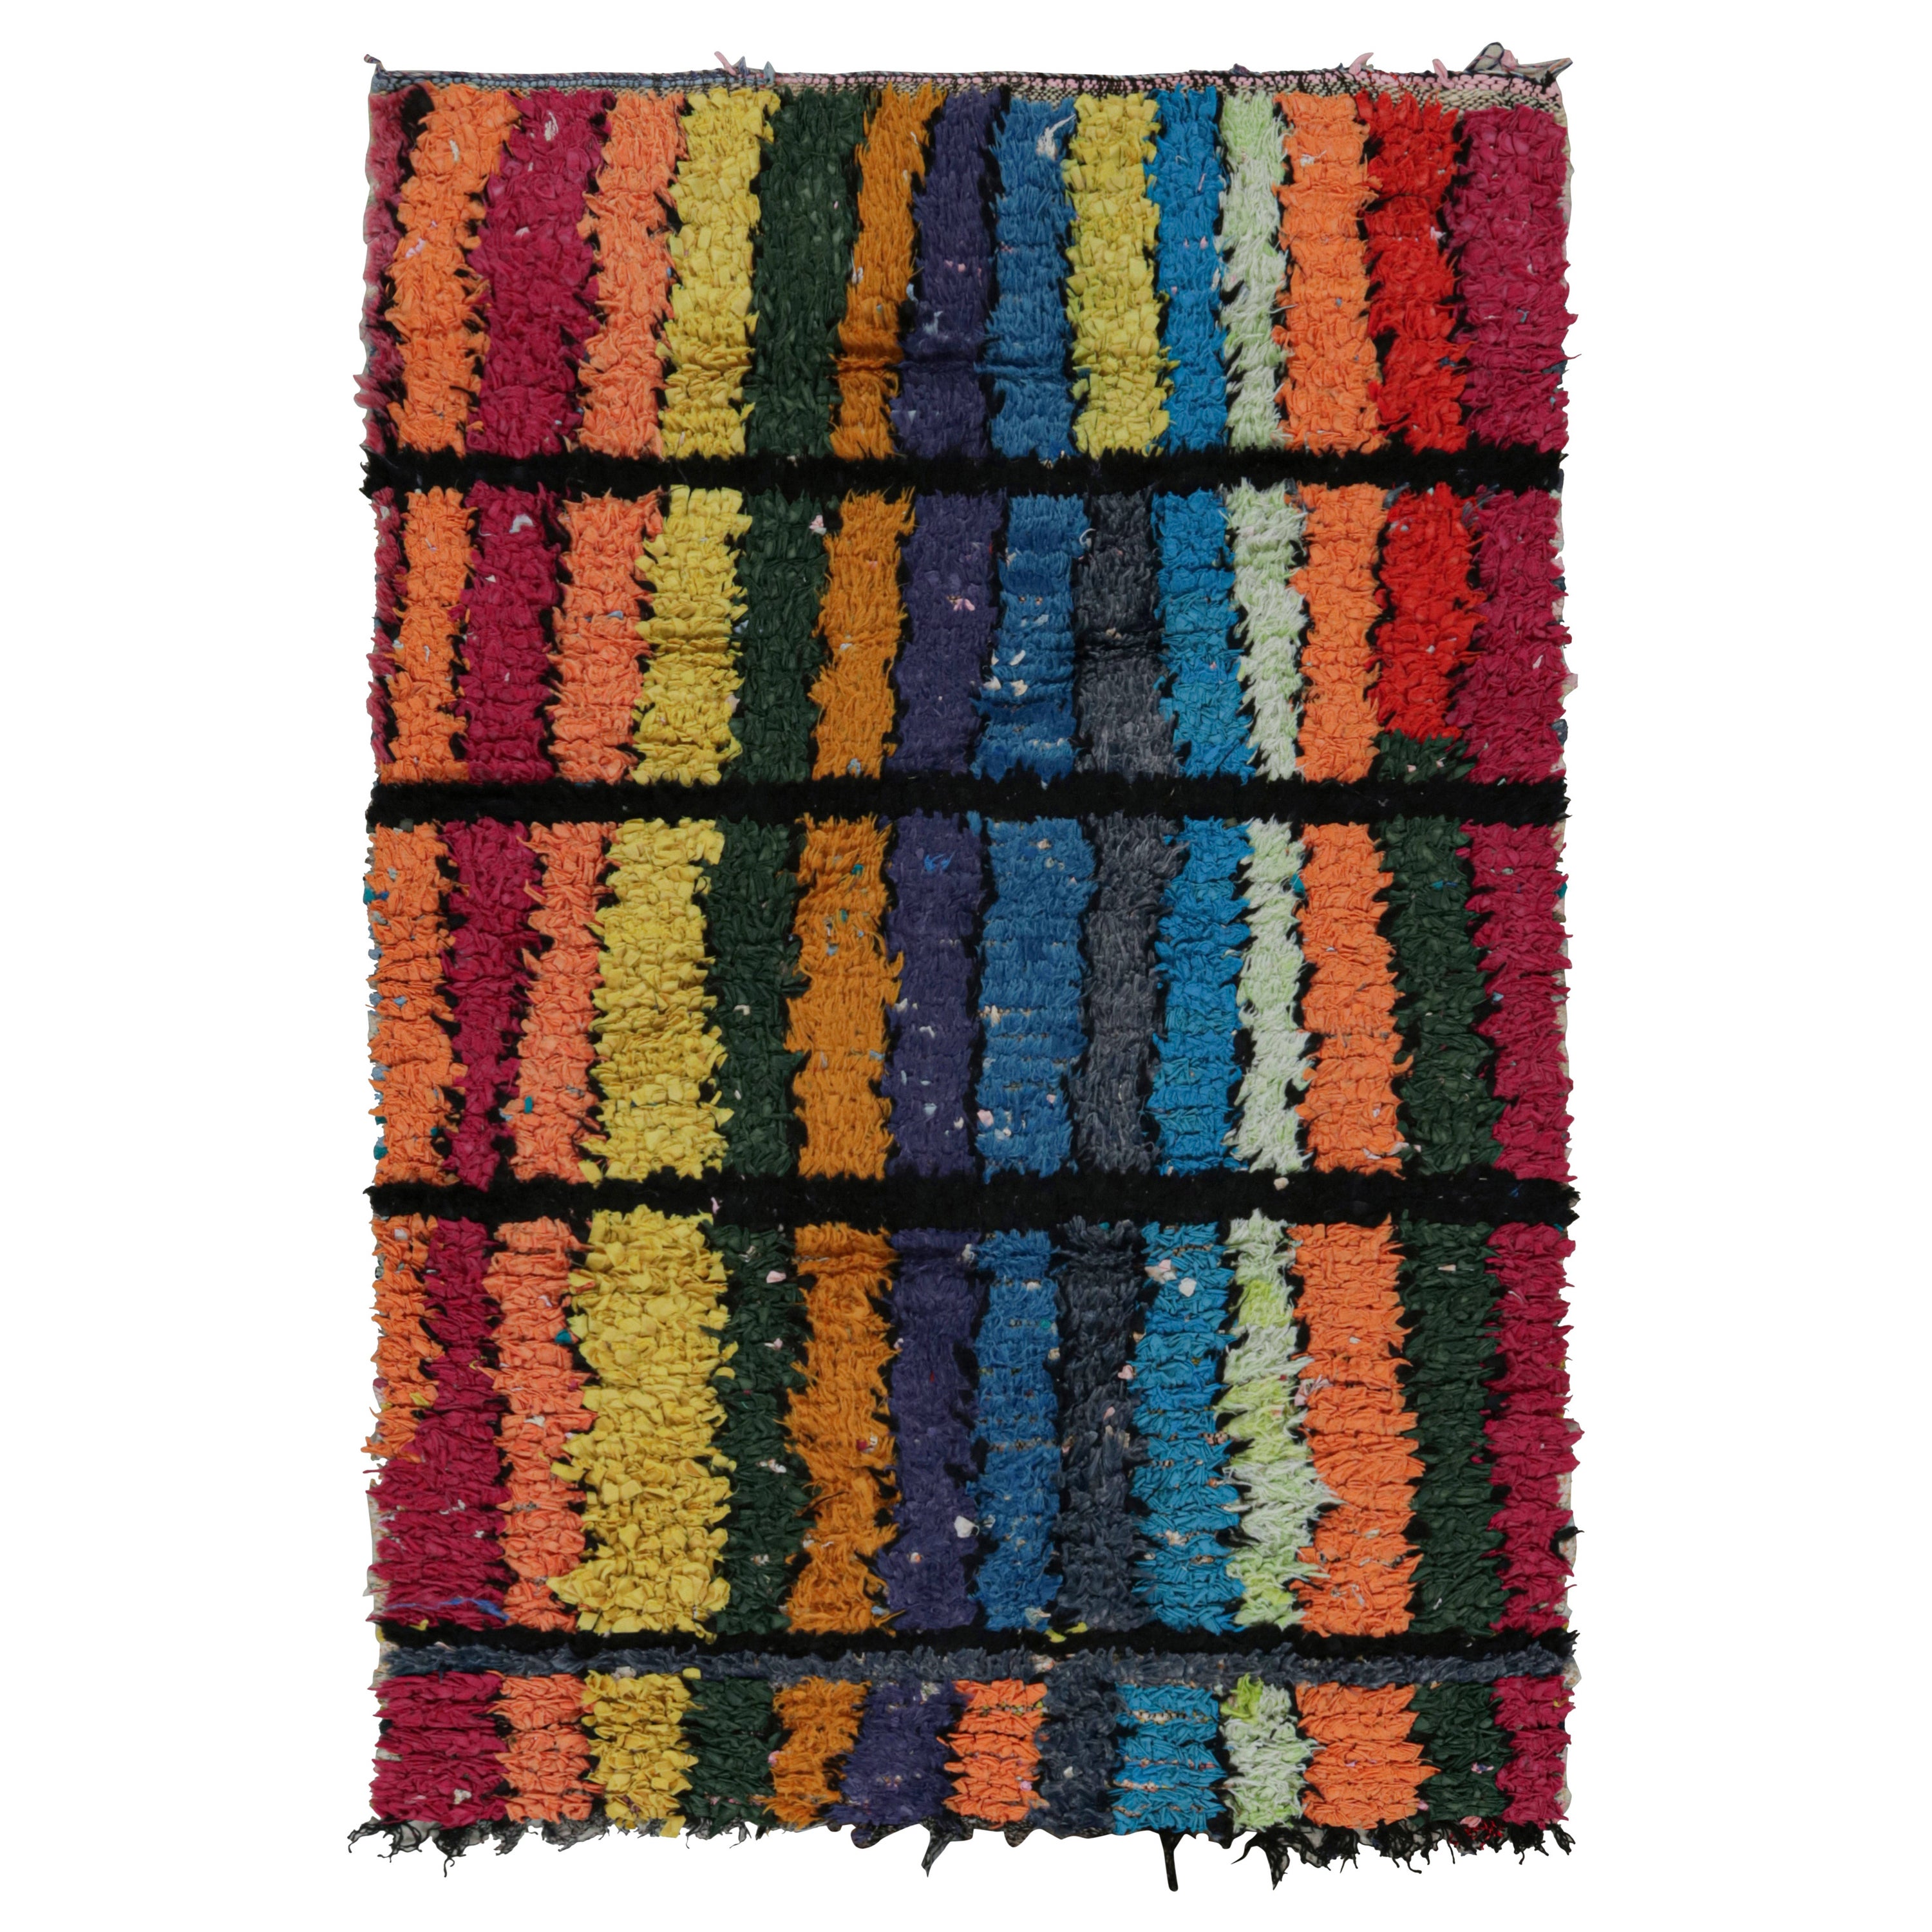 1950s Azilal Moroccan Rug with Polychromatic Patterns by Rug & Kilim